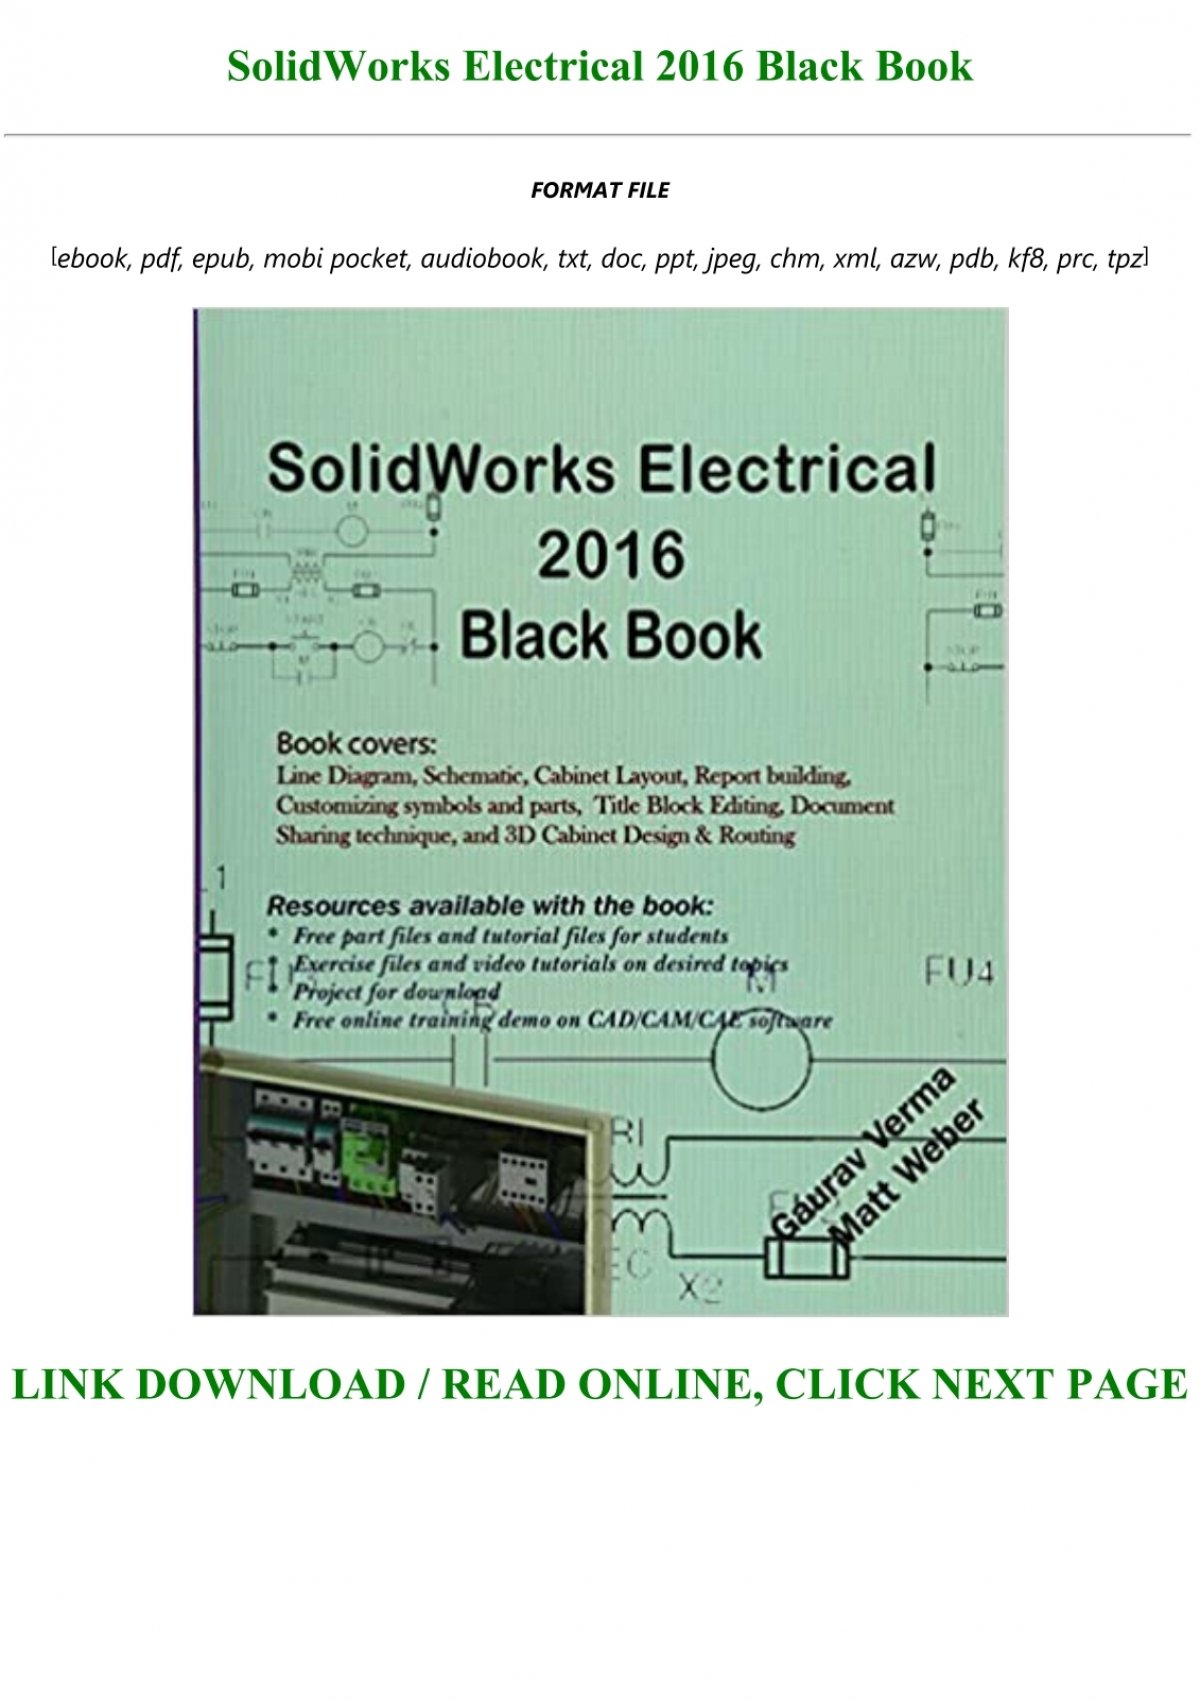 solidworks electrical black book free download